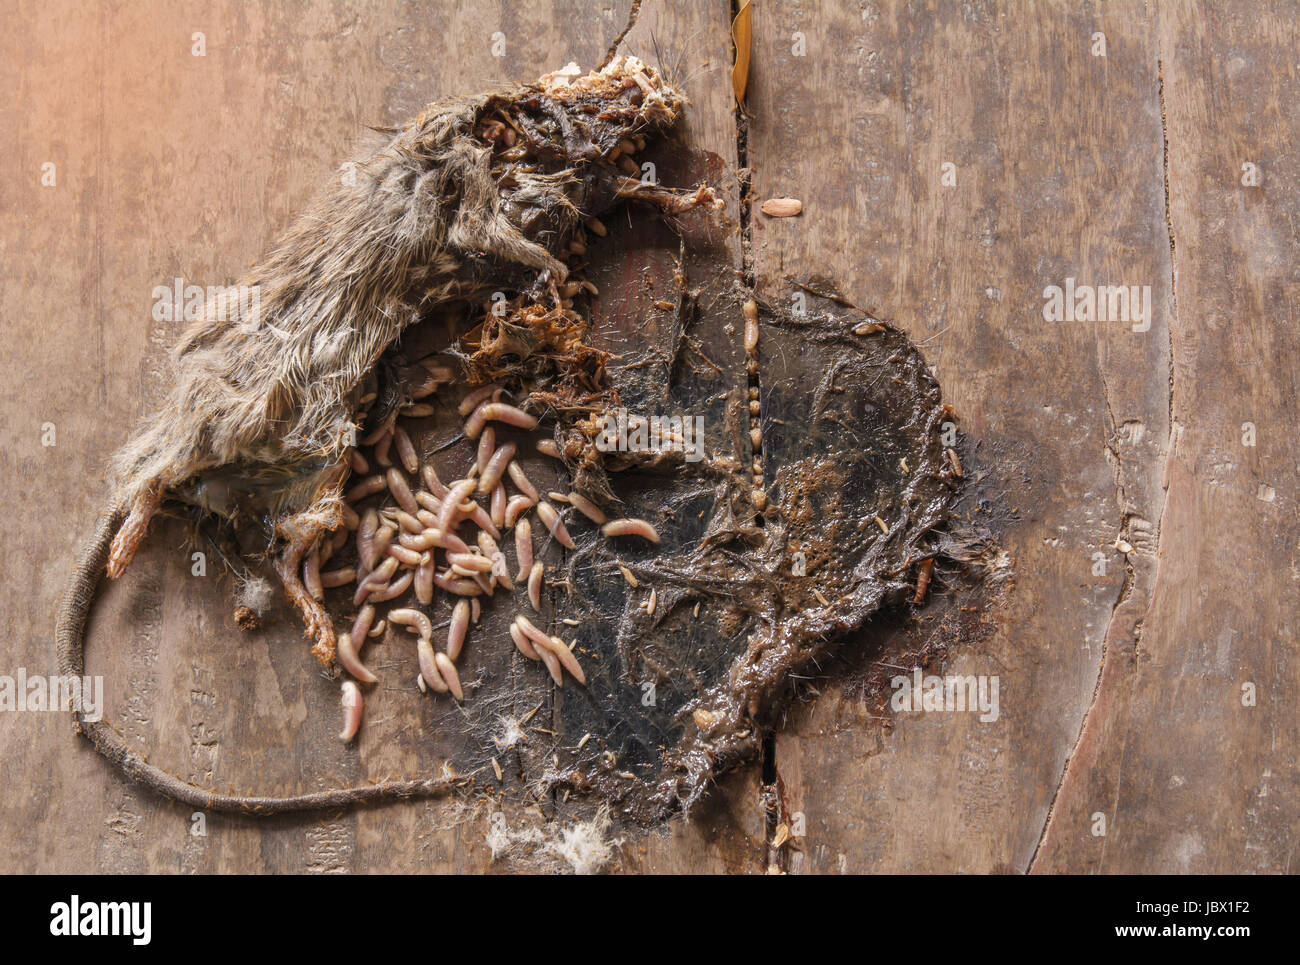 Dead gray and white mouse with maggots in body of mouse on wooden ground. Stock Photo